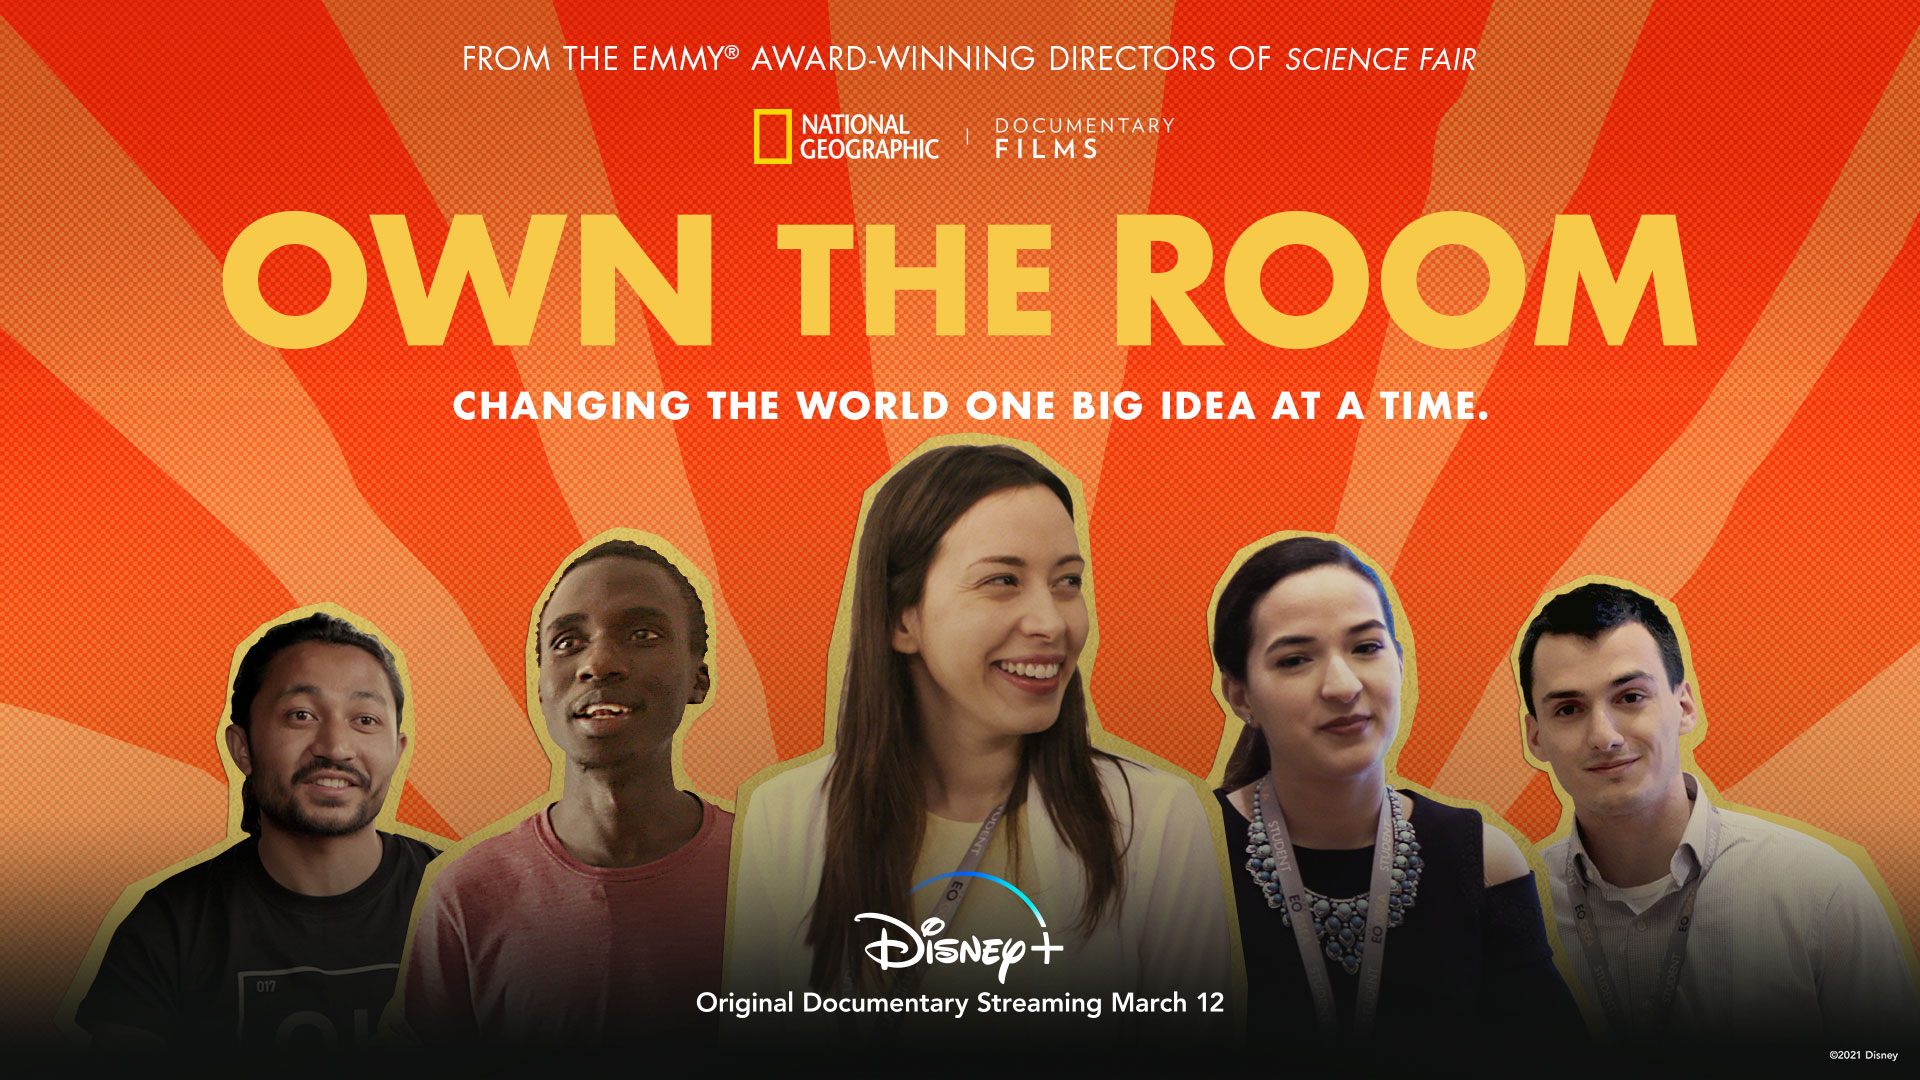 Disney+ to Exclusively Premiere Documentary ‘Own The Room’ on March 12